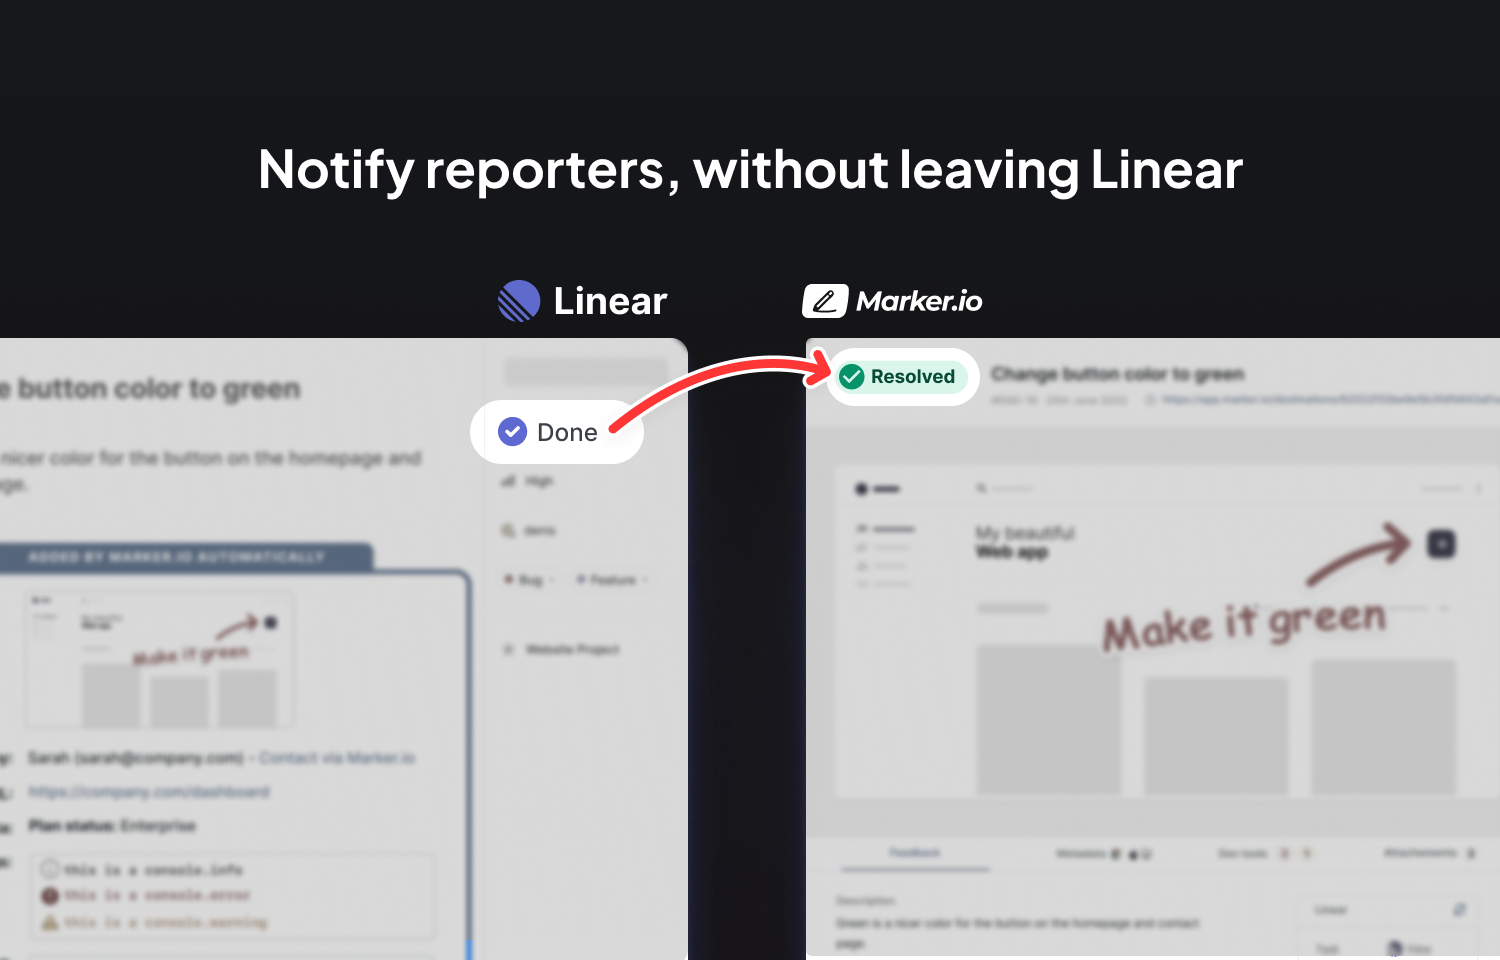 Notify reporters, without leaving Linear.